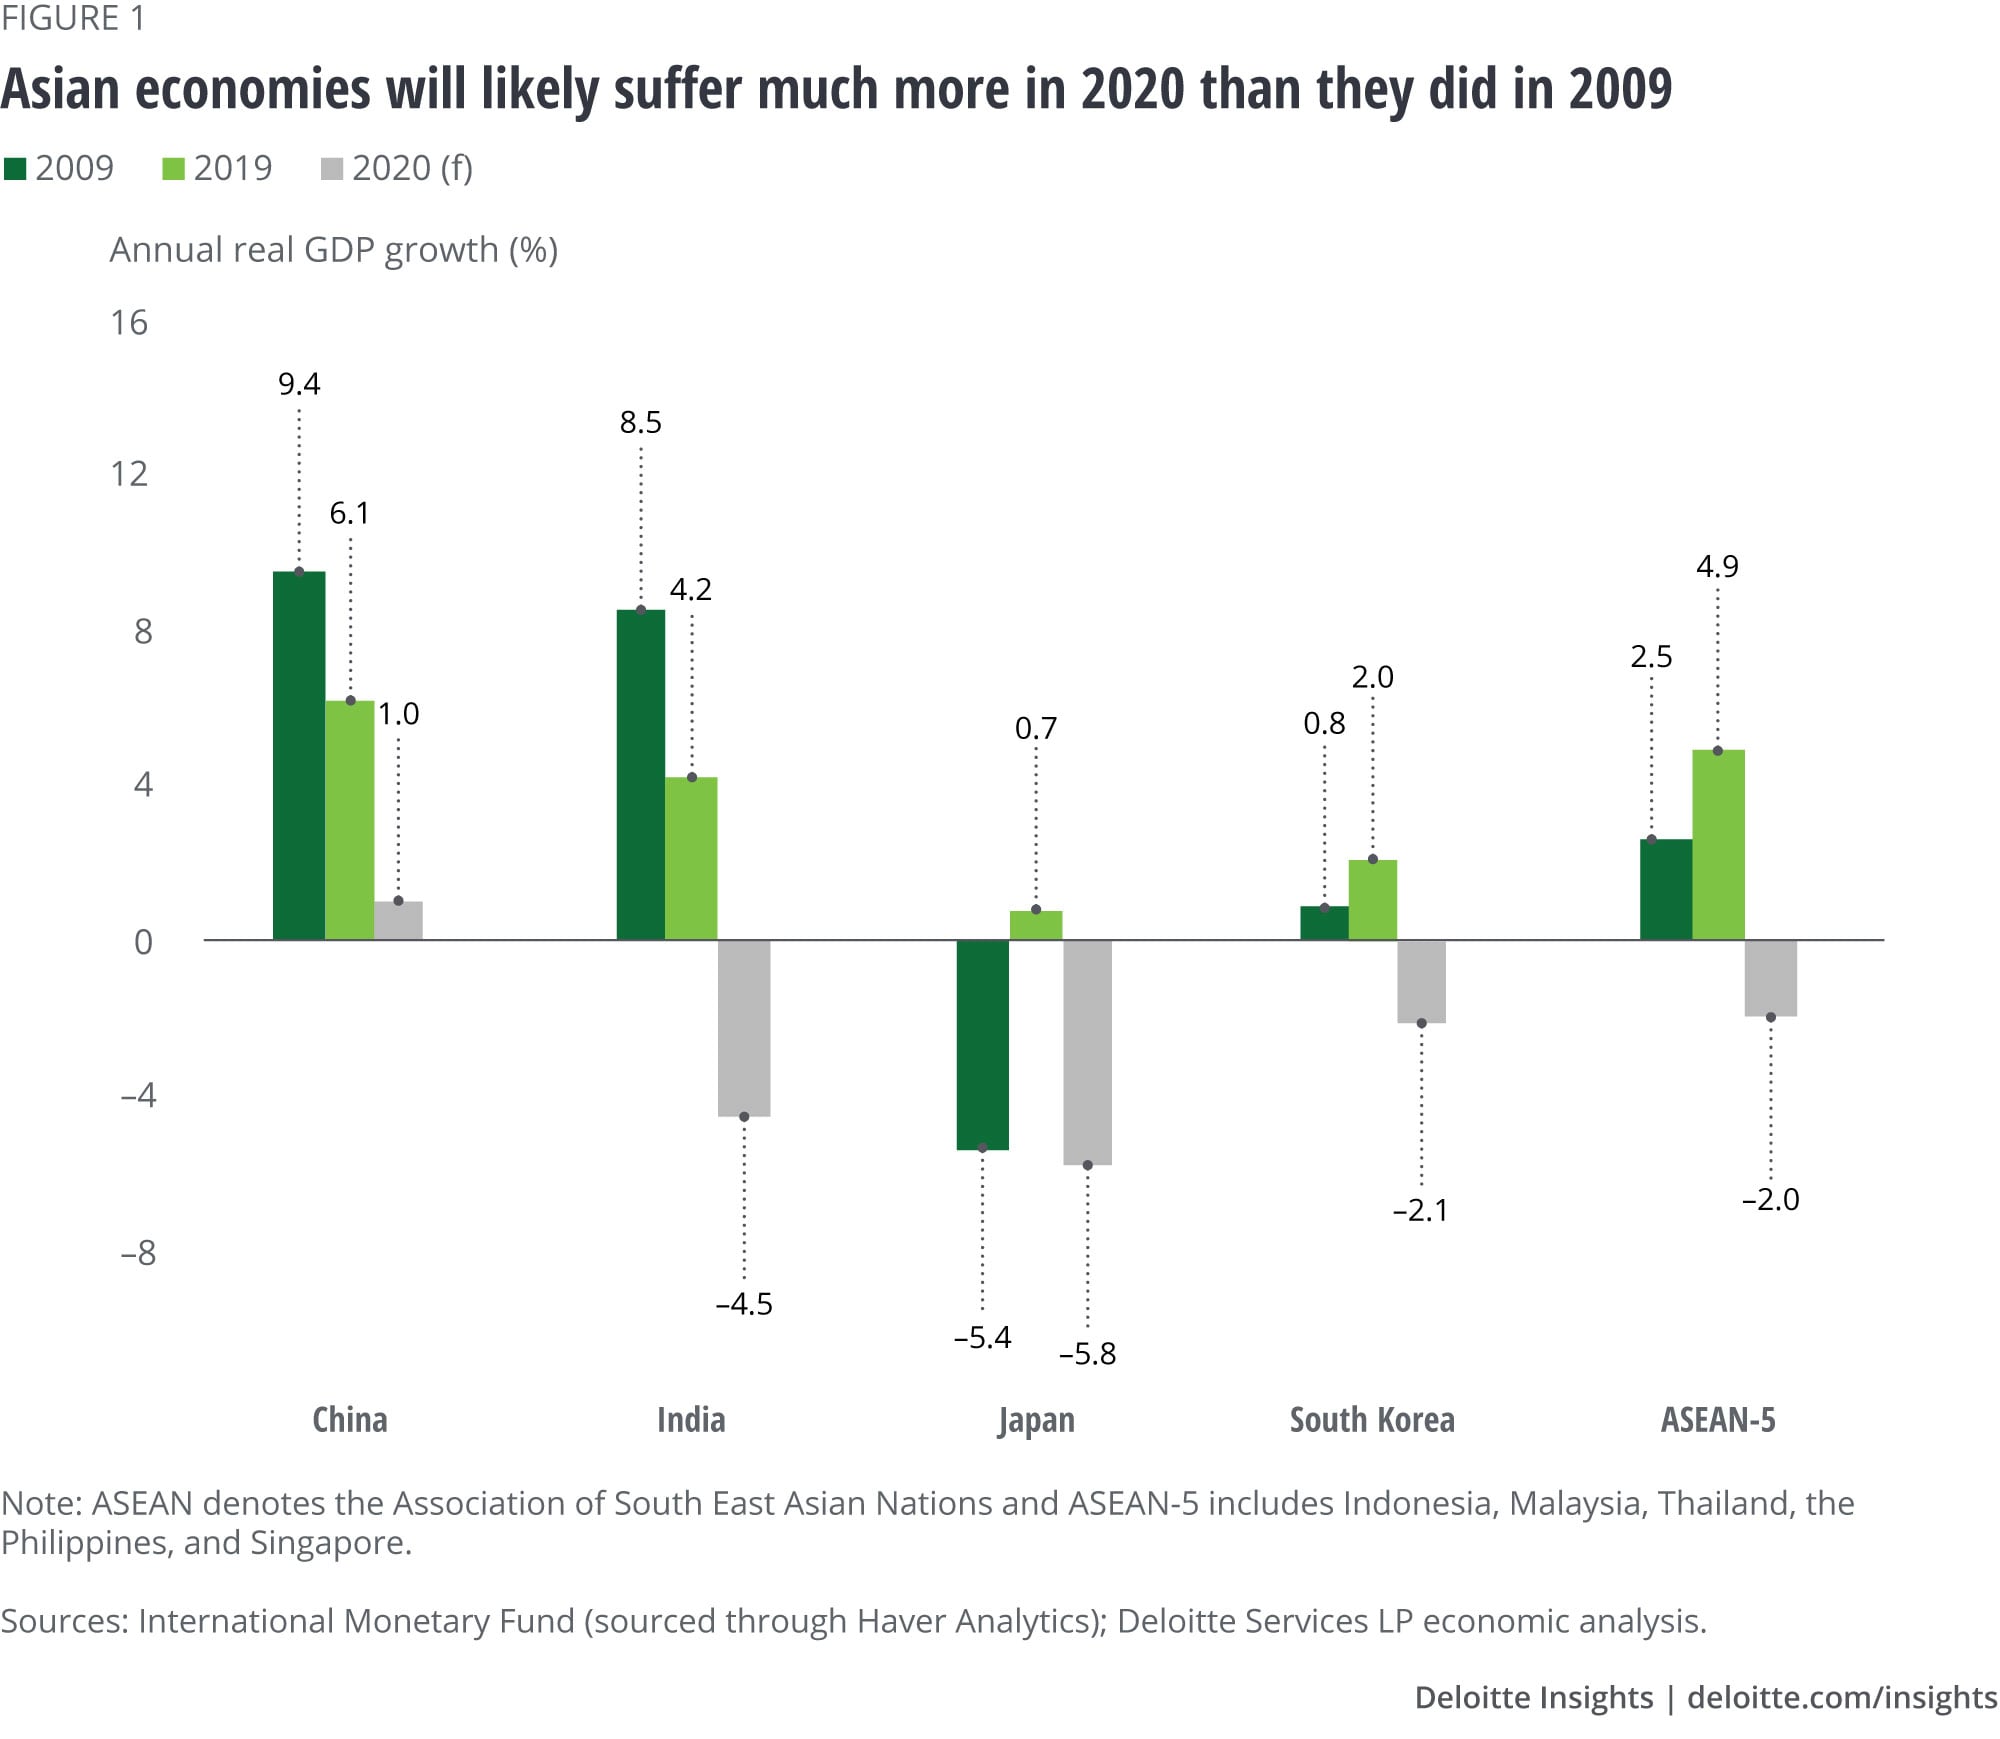 Asian economies will likely suffer much more in 2020 than they did in 2009